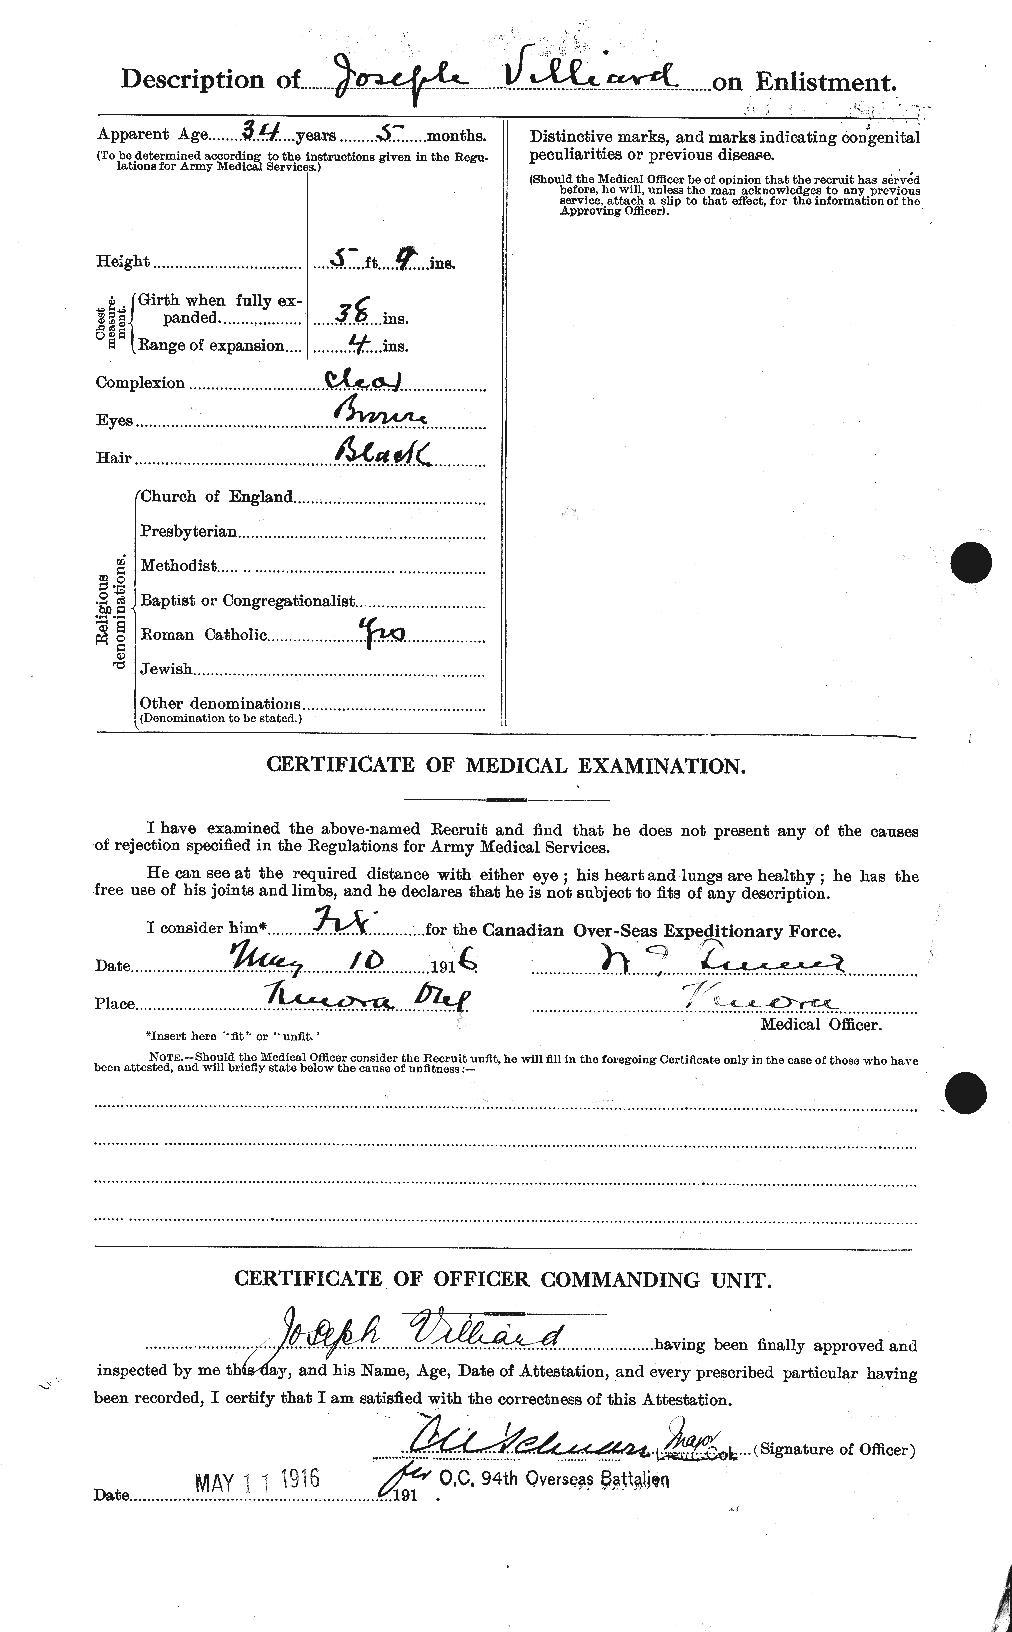 Personnel Records of the First World War - CEF 653899b